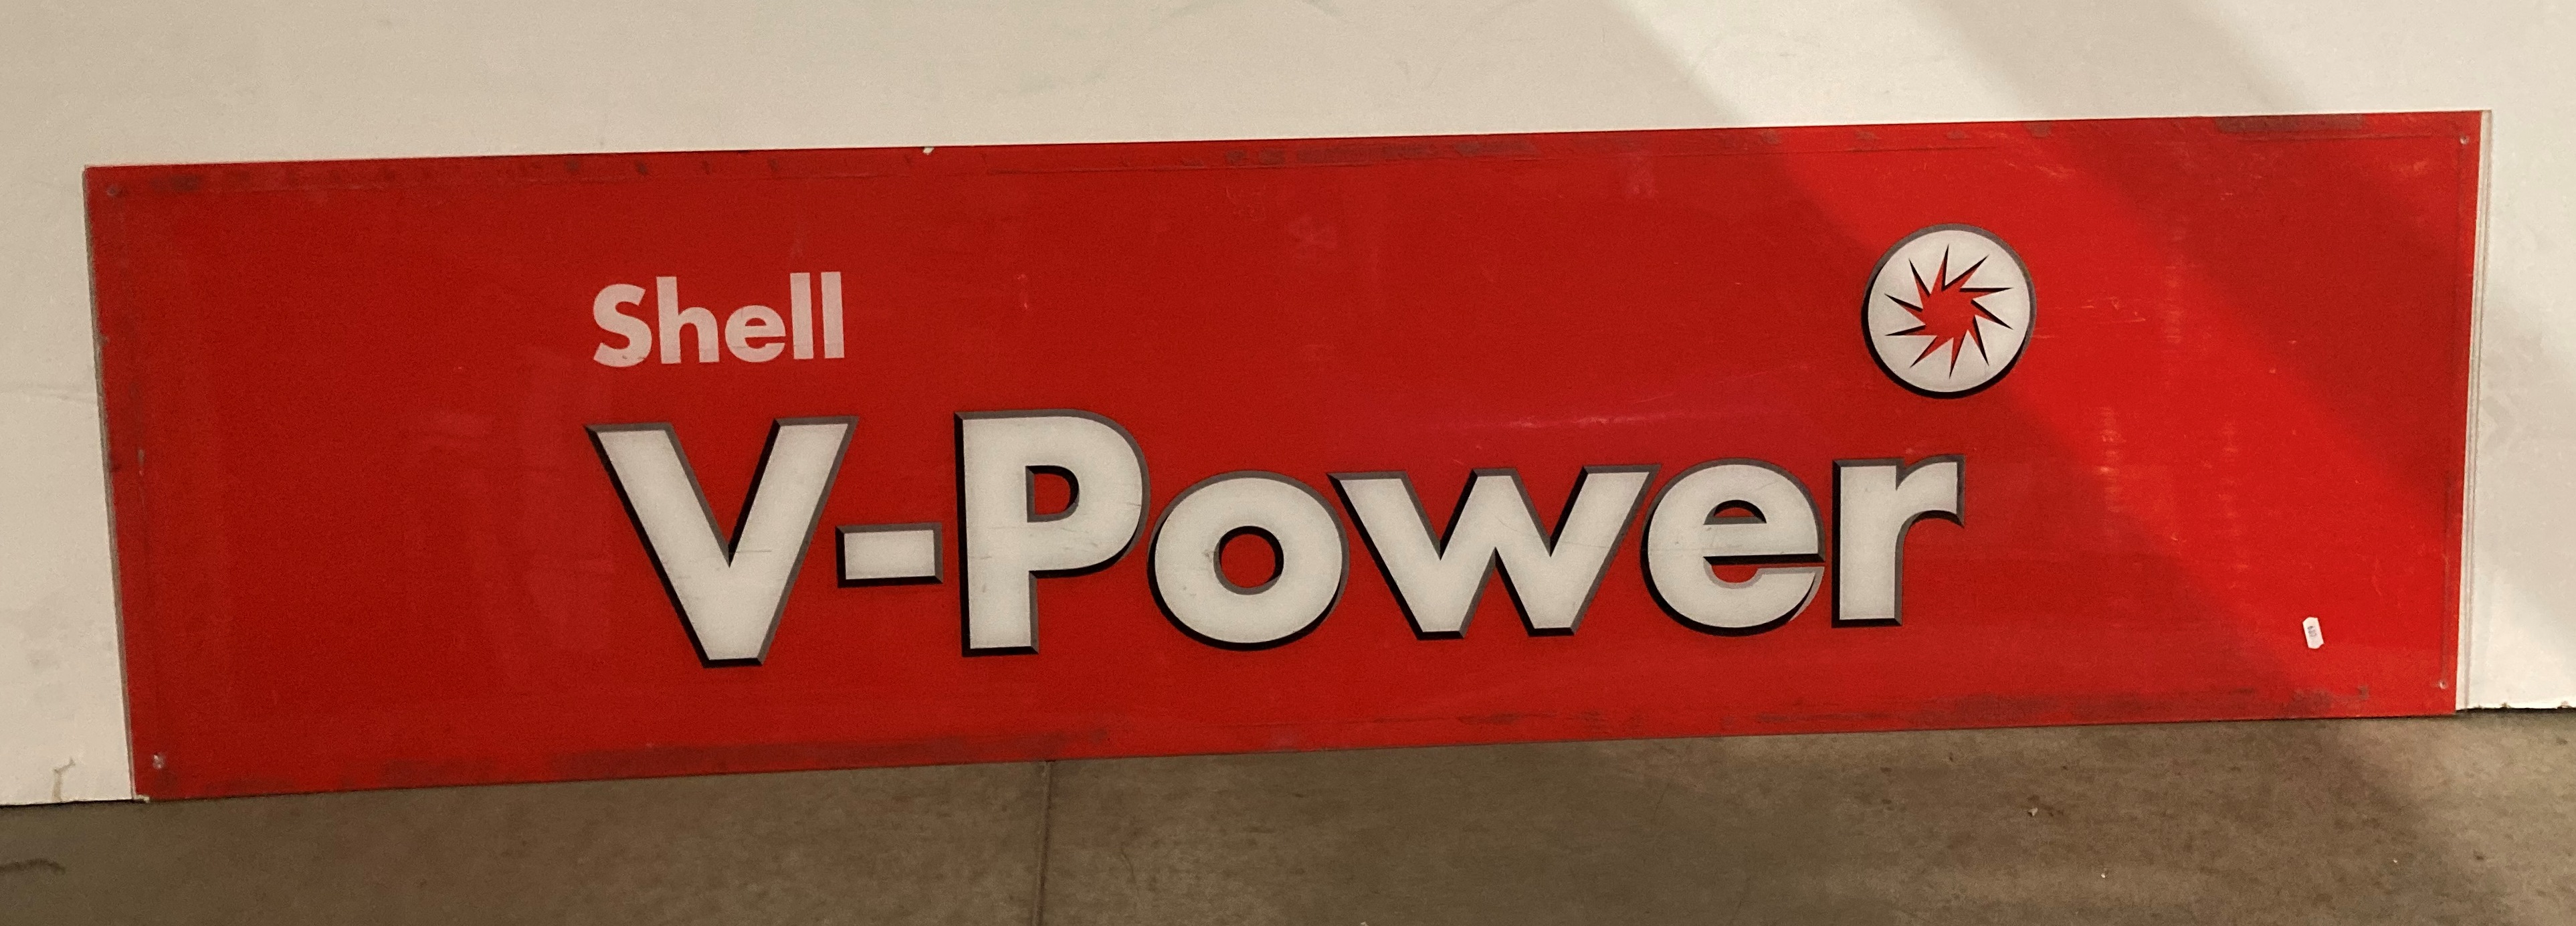 'Shell V-Power' red and white perspex sign - 181 x 48cm (saleroom location: MA1 wall) - Image 3 of 3